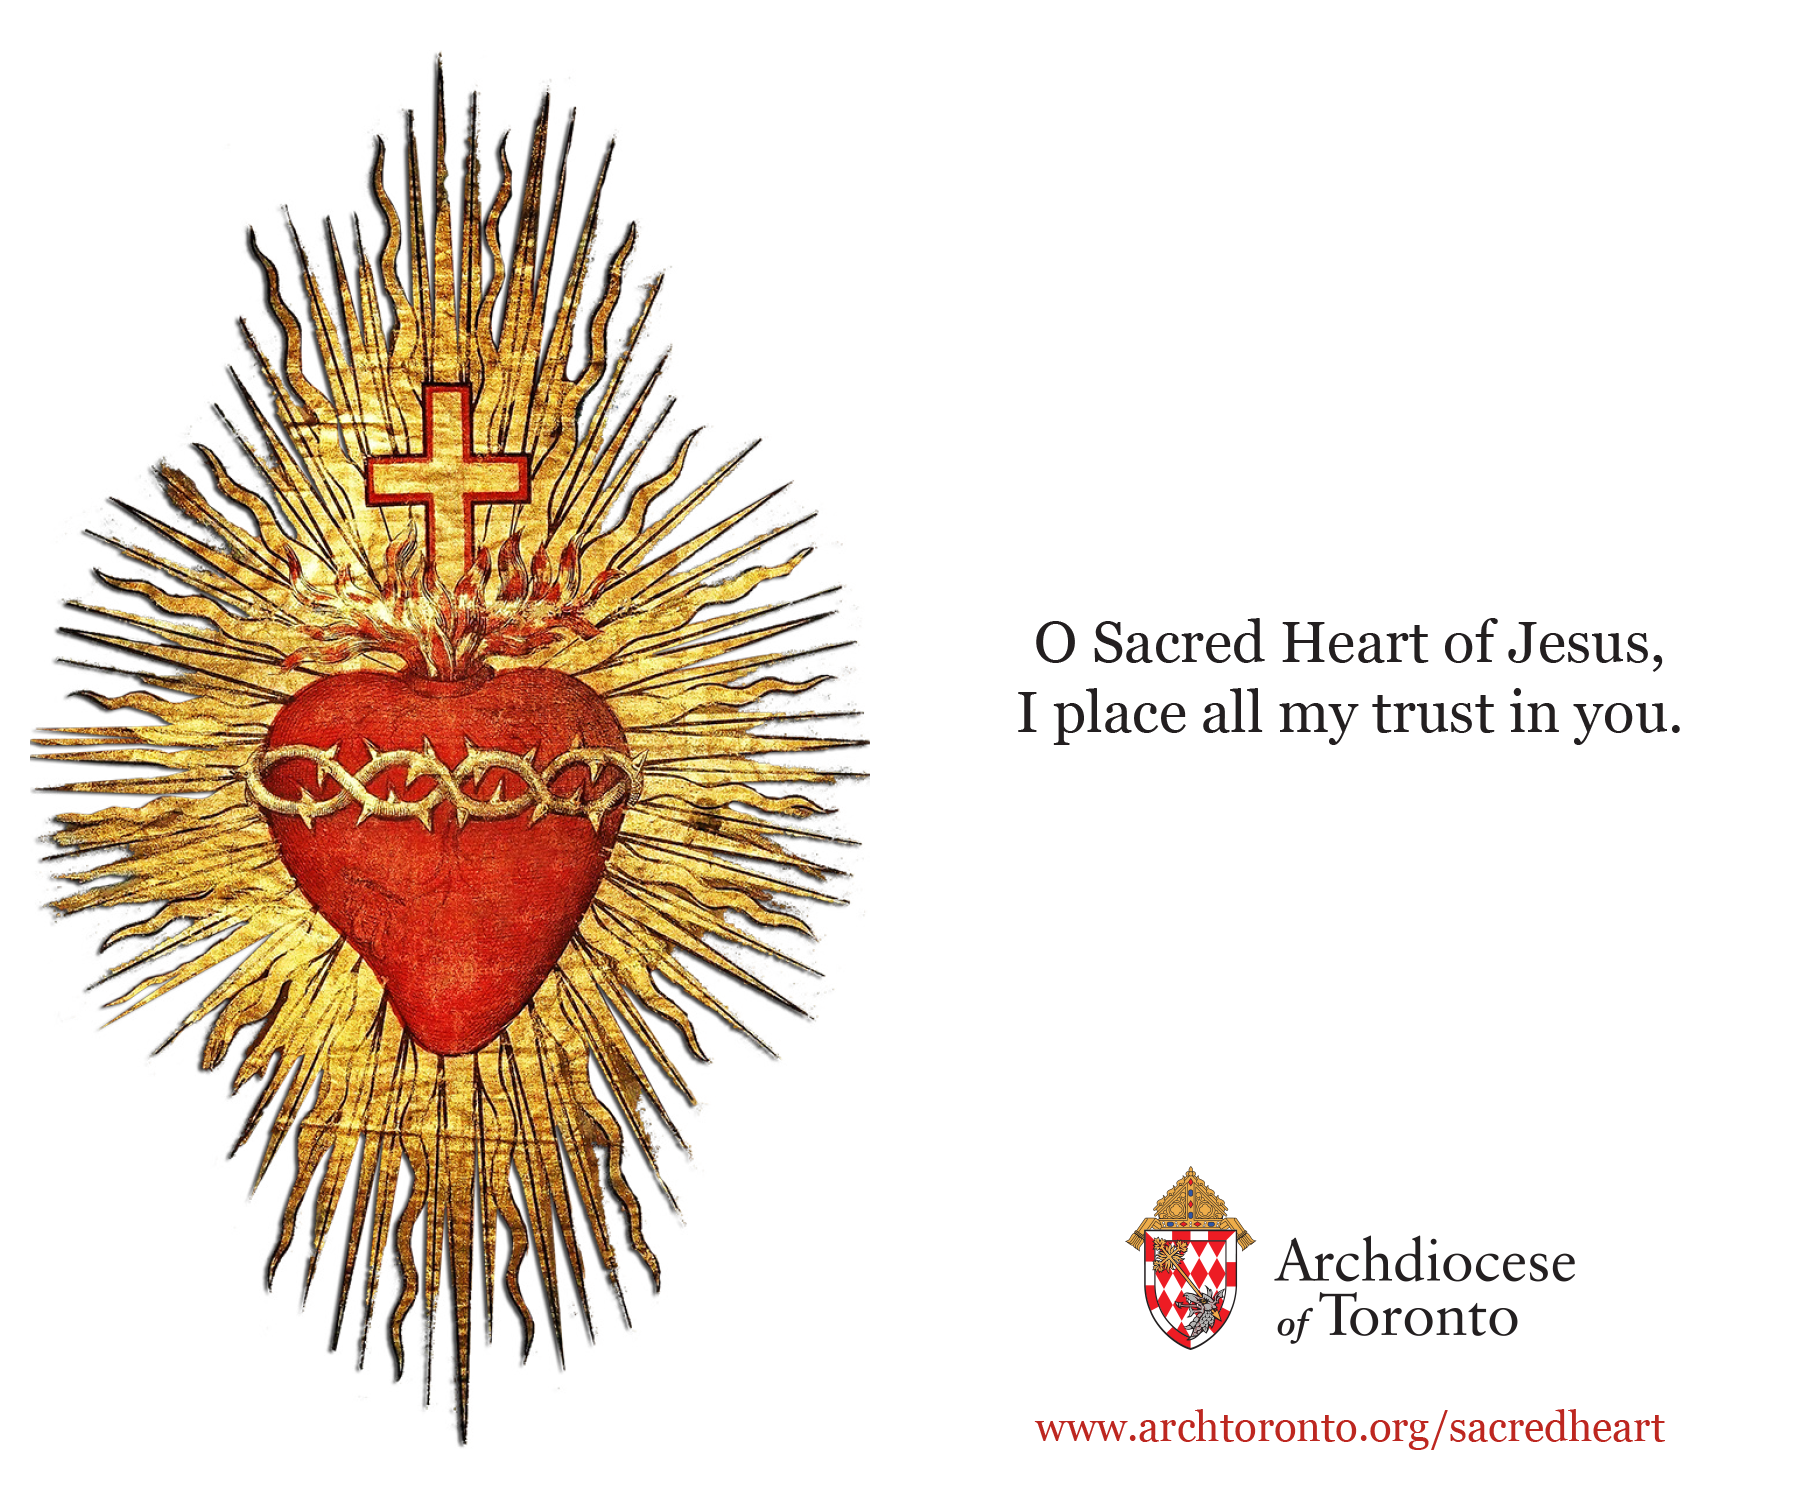 O Sacred Heart of Jesus, I place all my trust in you.